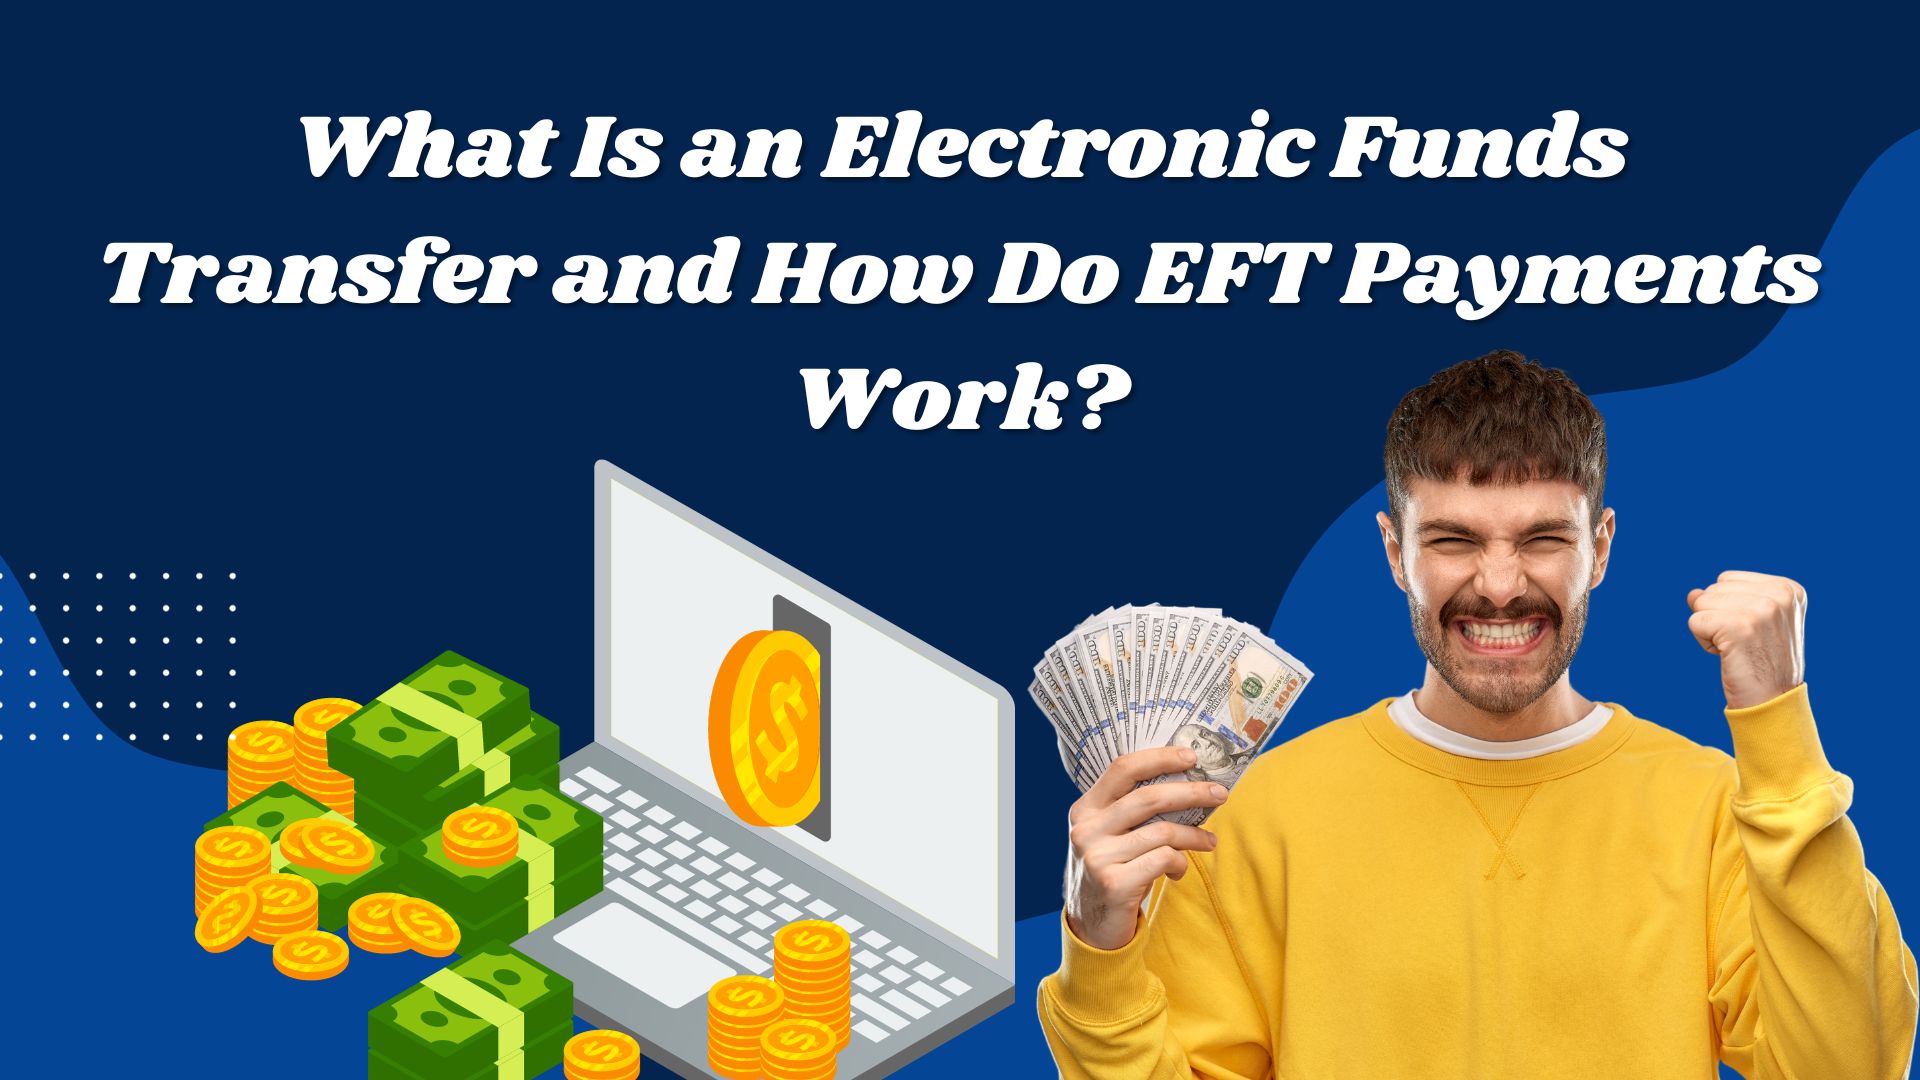 What Is EFT Payment meaning? How Do EFT Payments Work?